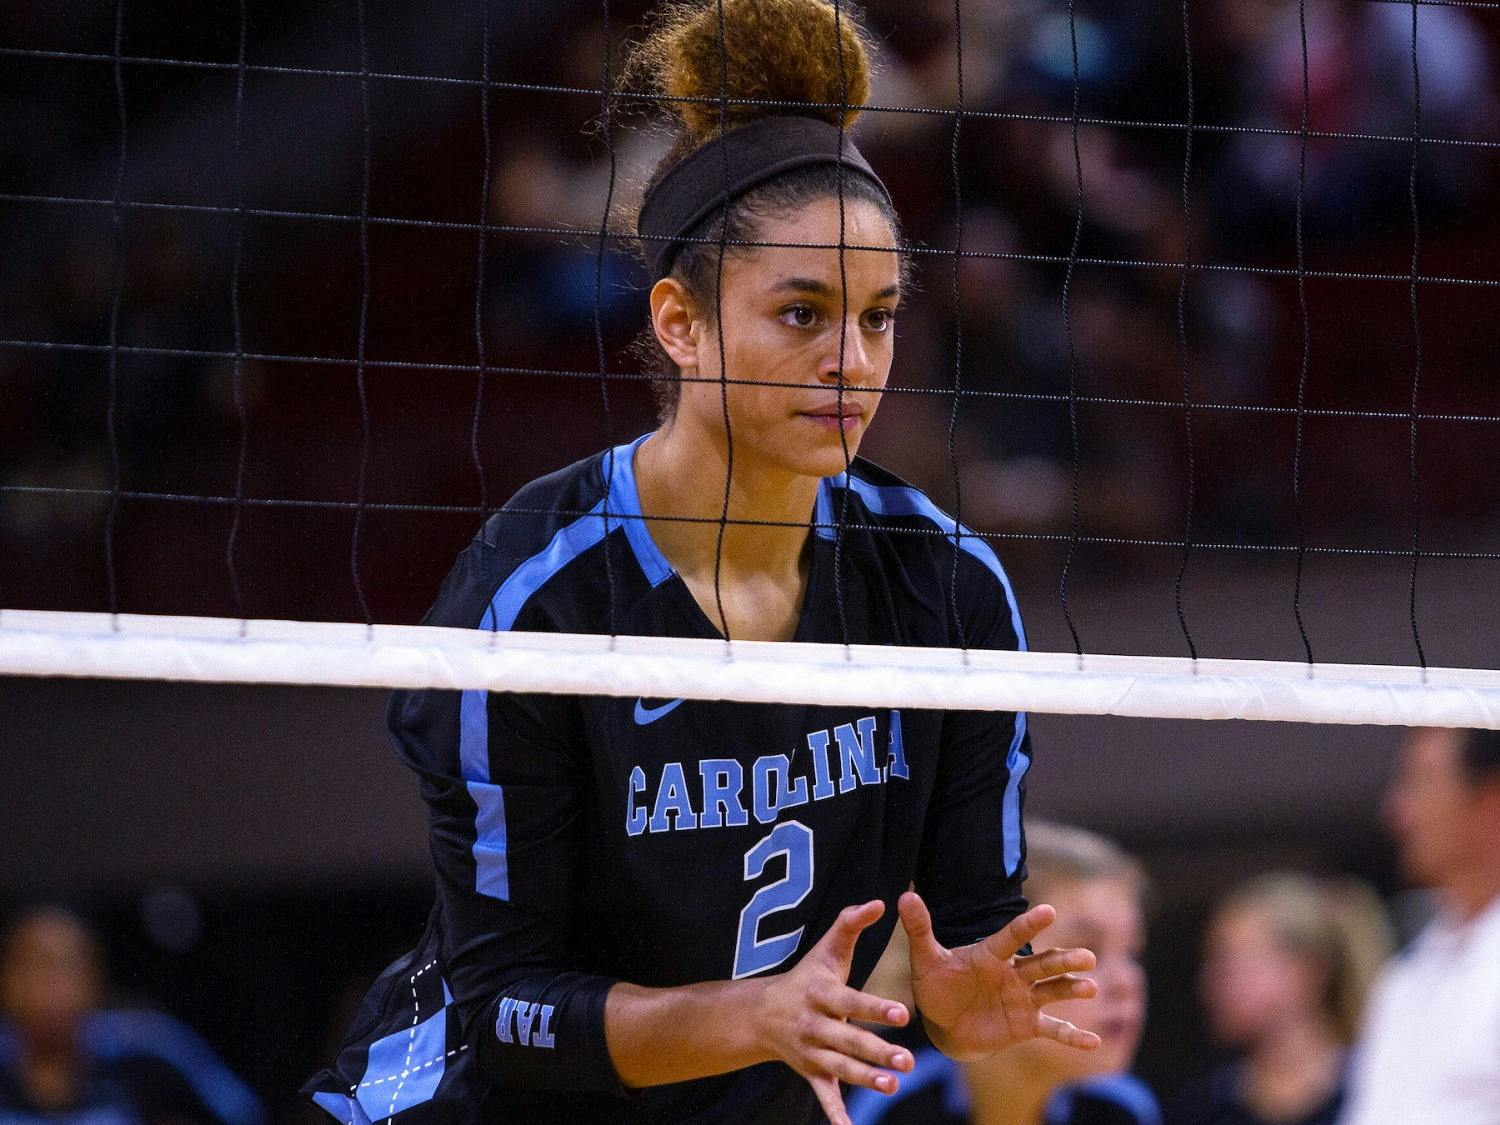 UNC sophomore volleyball player Carly Peck at a previous game. Photo courtesy of UNC Athletic Communications.